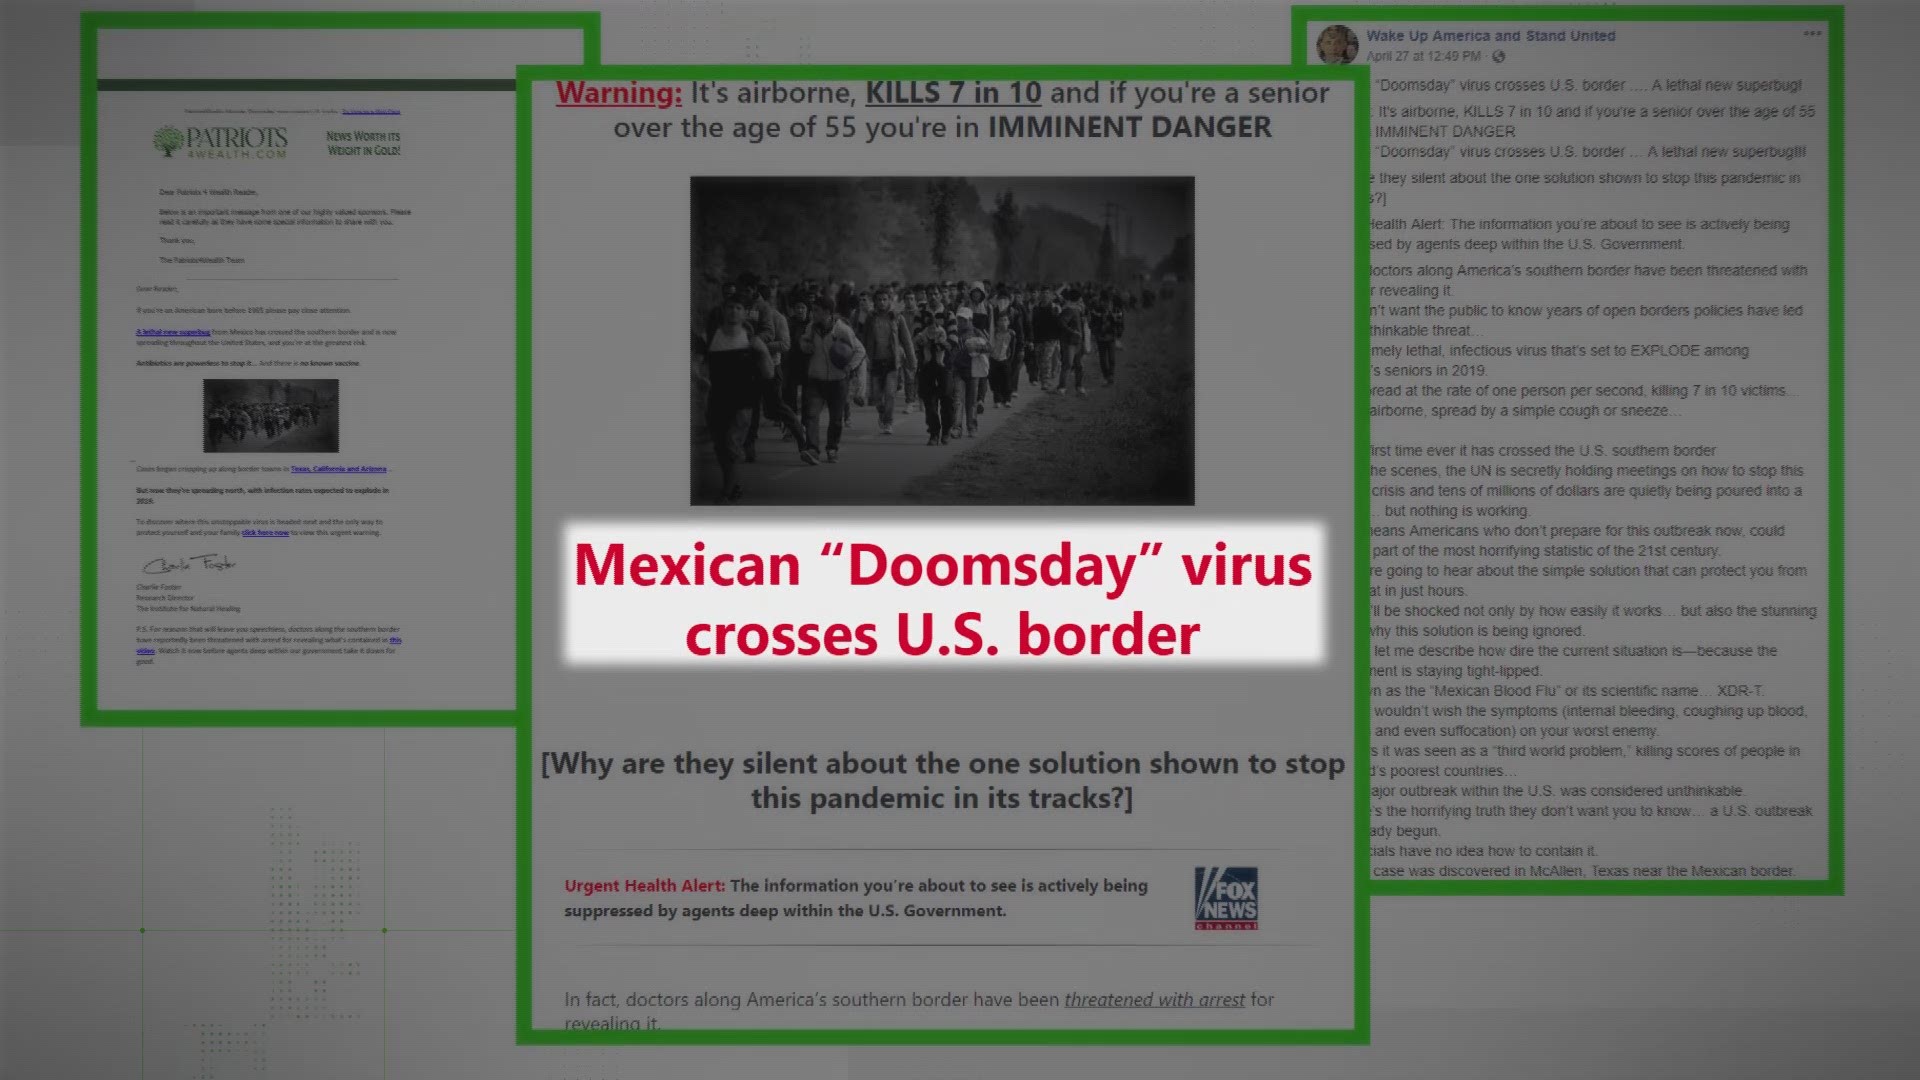 A scary claim is circling in emails, social media posts and even videos. It says an immigrant recently brought a highly fatal virus across our southern border and the experts are working to hide the facts.